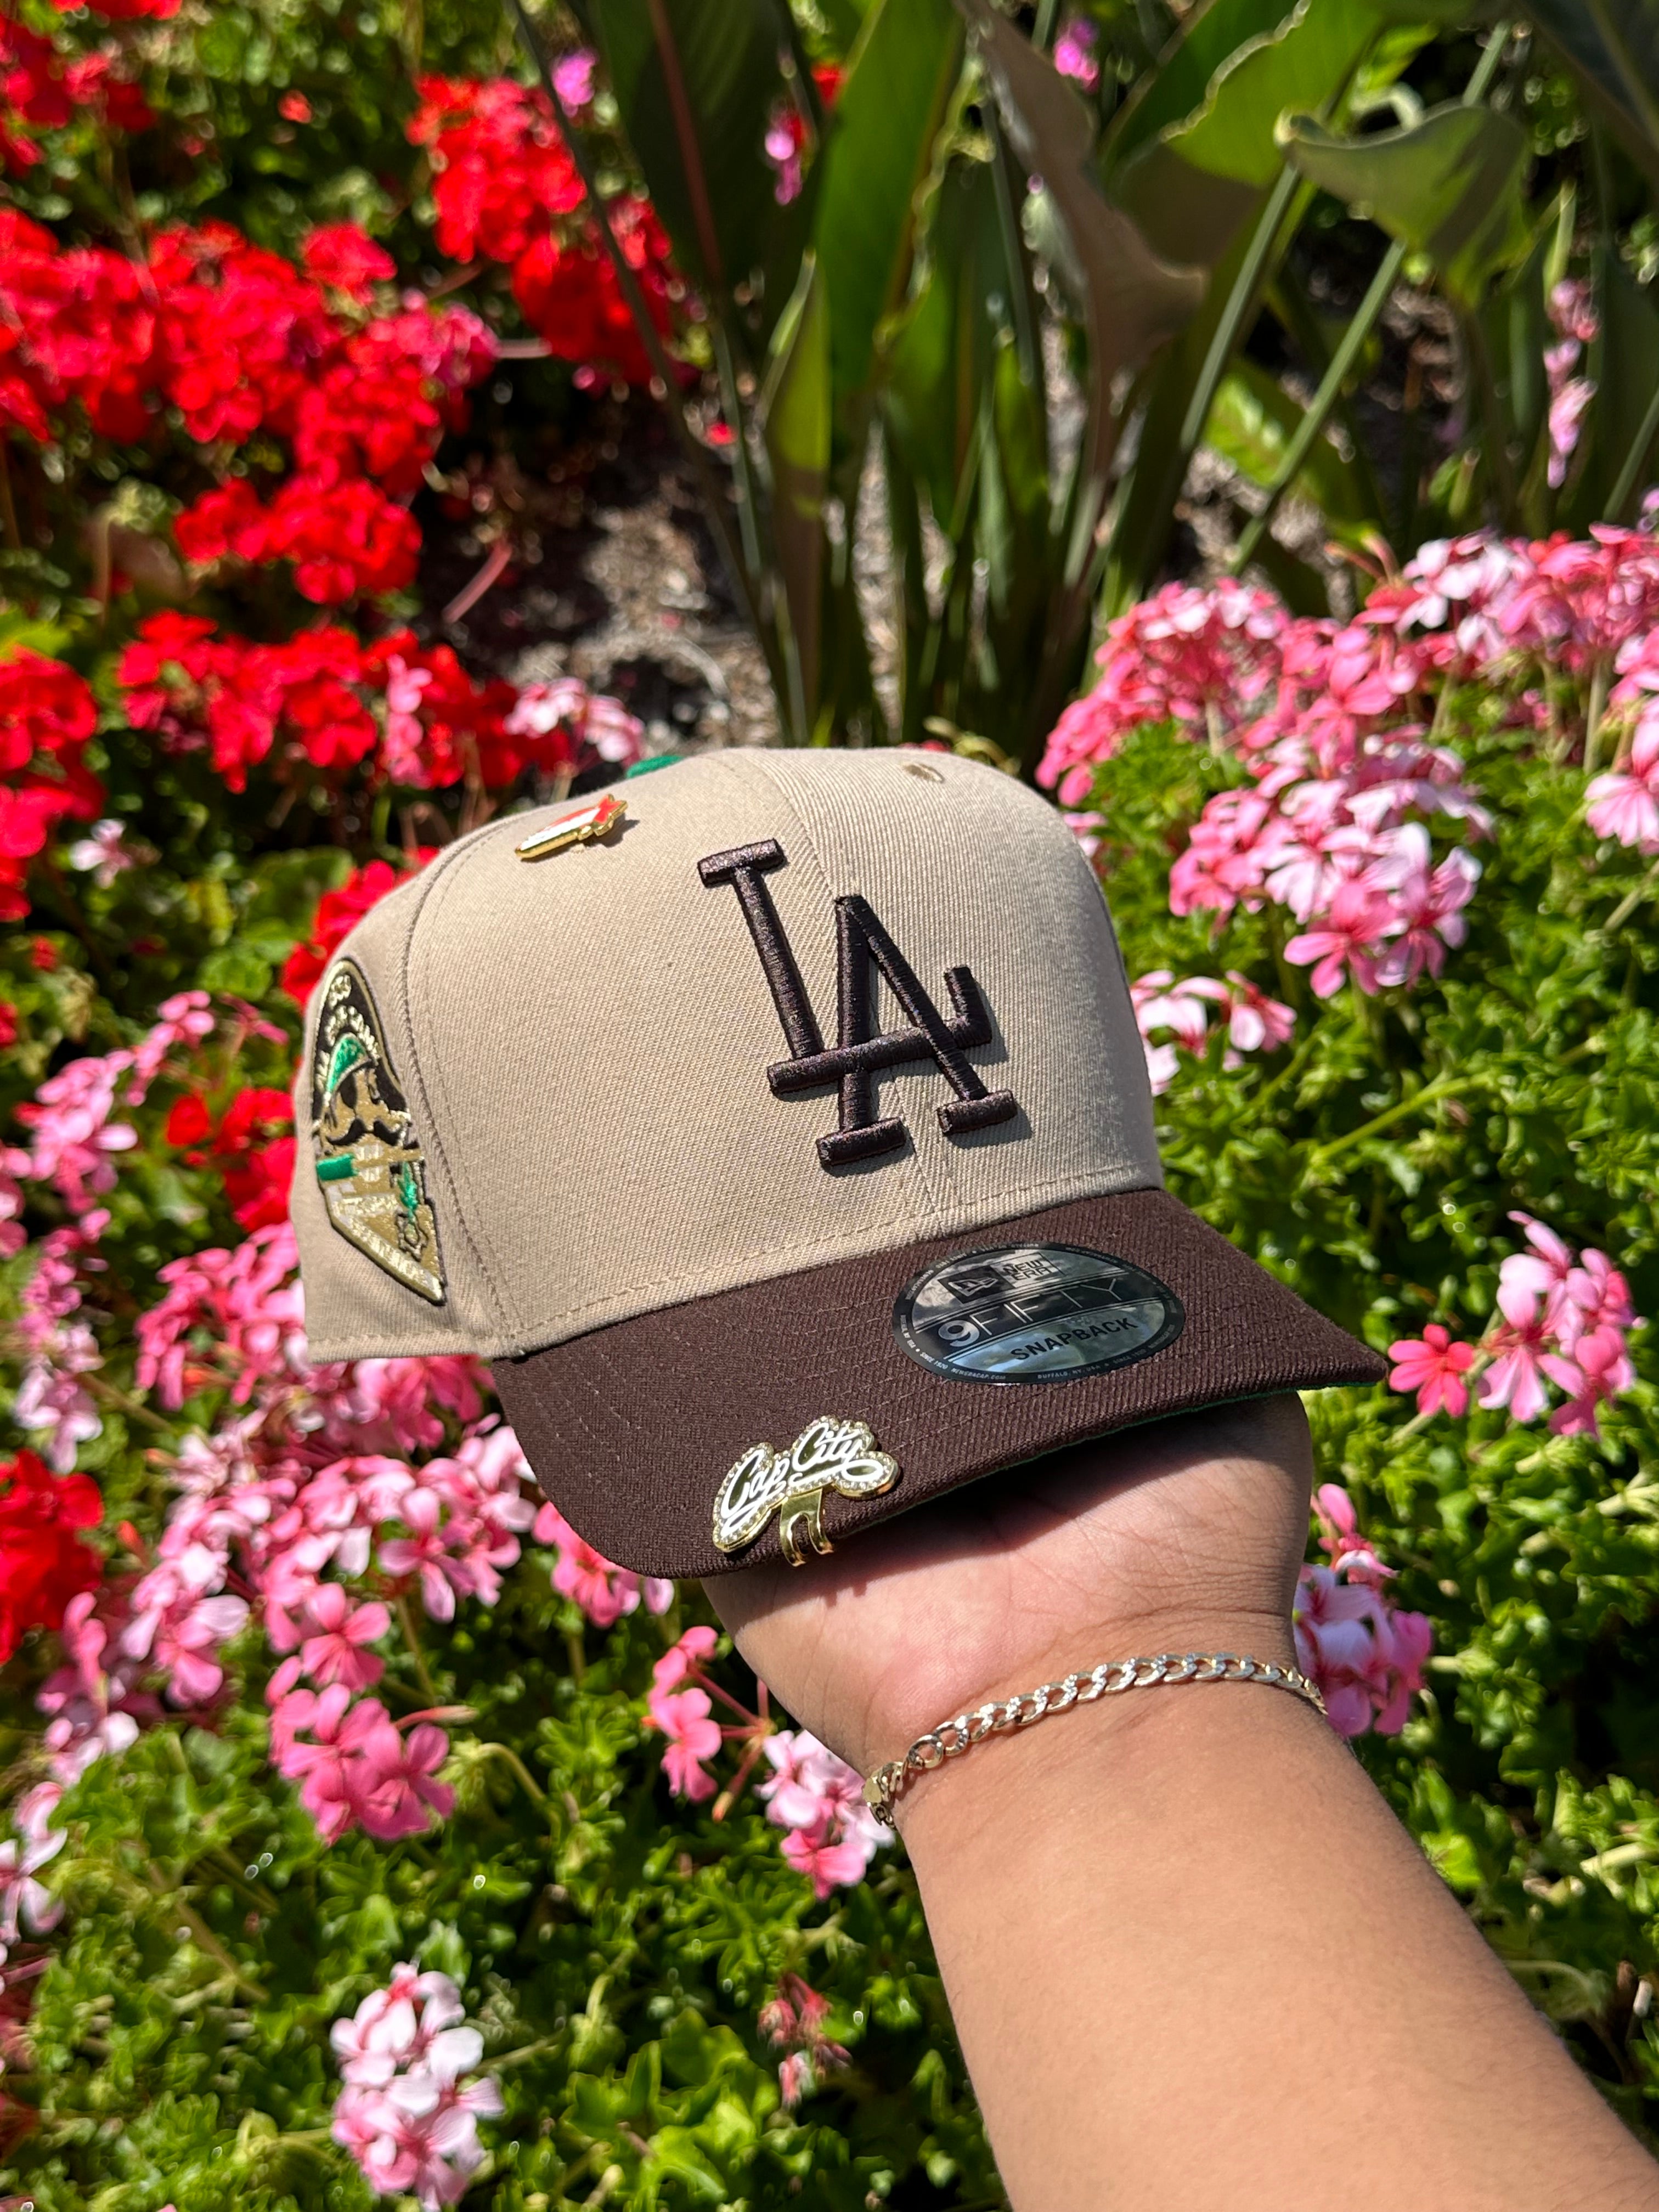 NEW ERA EXCLUSIVE 9FIFTY CAMEL BROWN LOS ANGELES DODGERS SNAPBACK W/ 1959 ALL STAR GAME PATCH